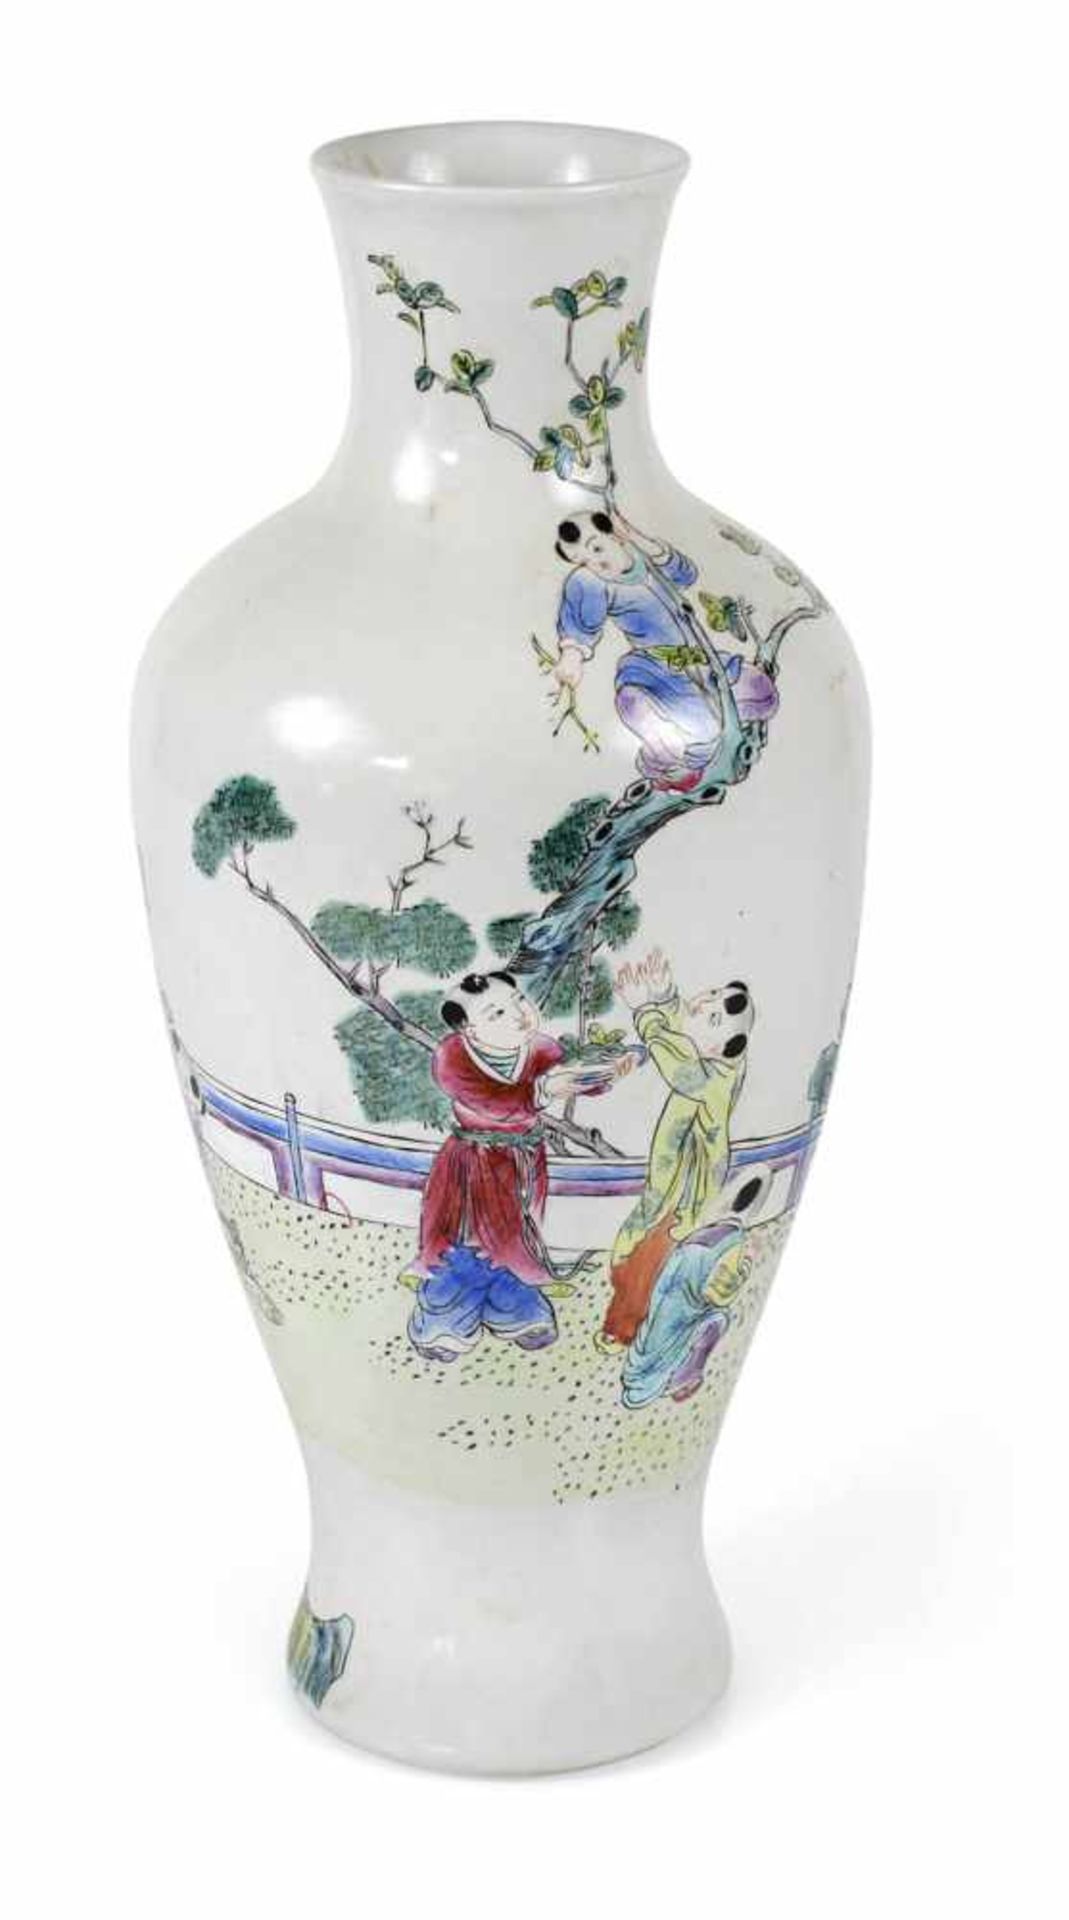 SCHULTERVASE, CHINA, 20. JH.43,6 CM